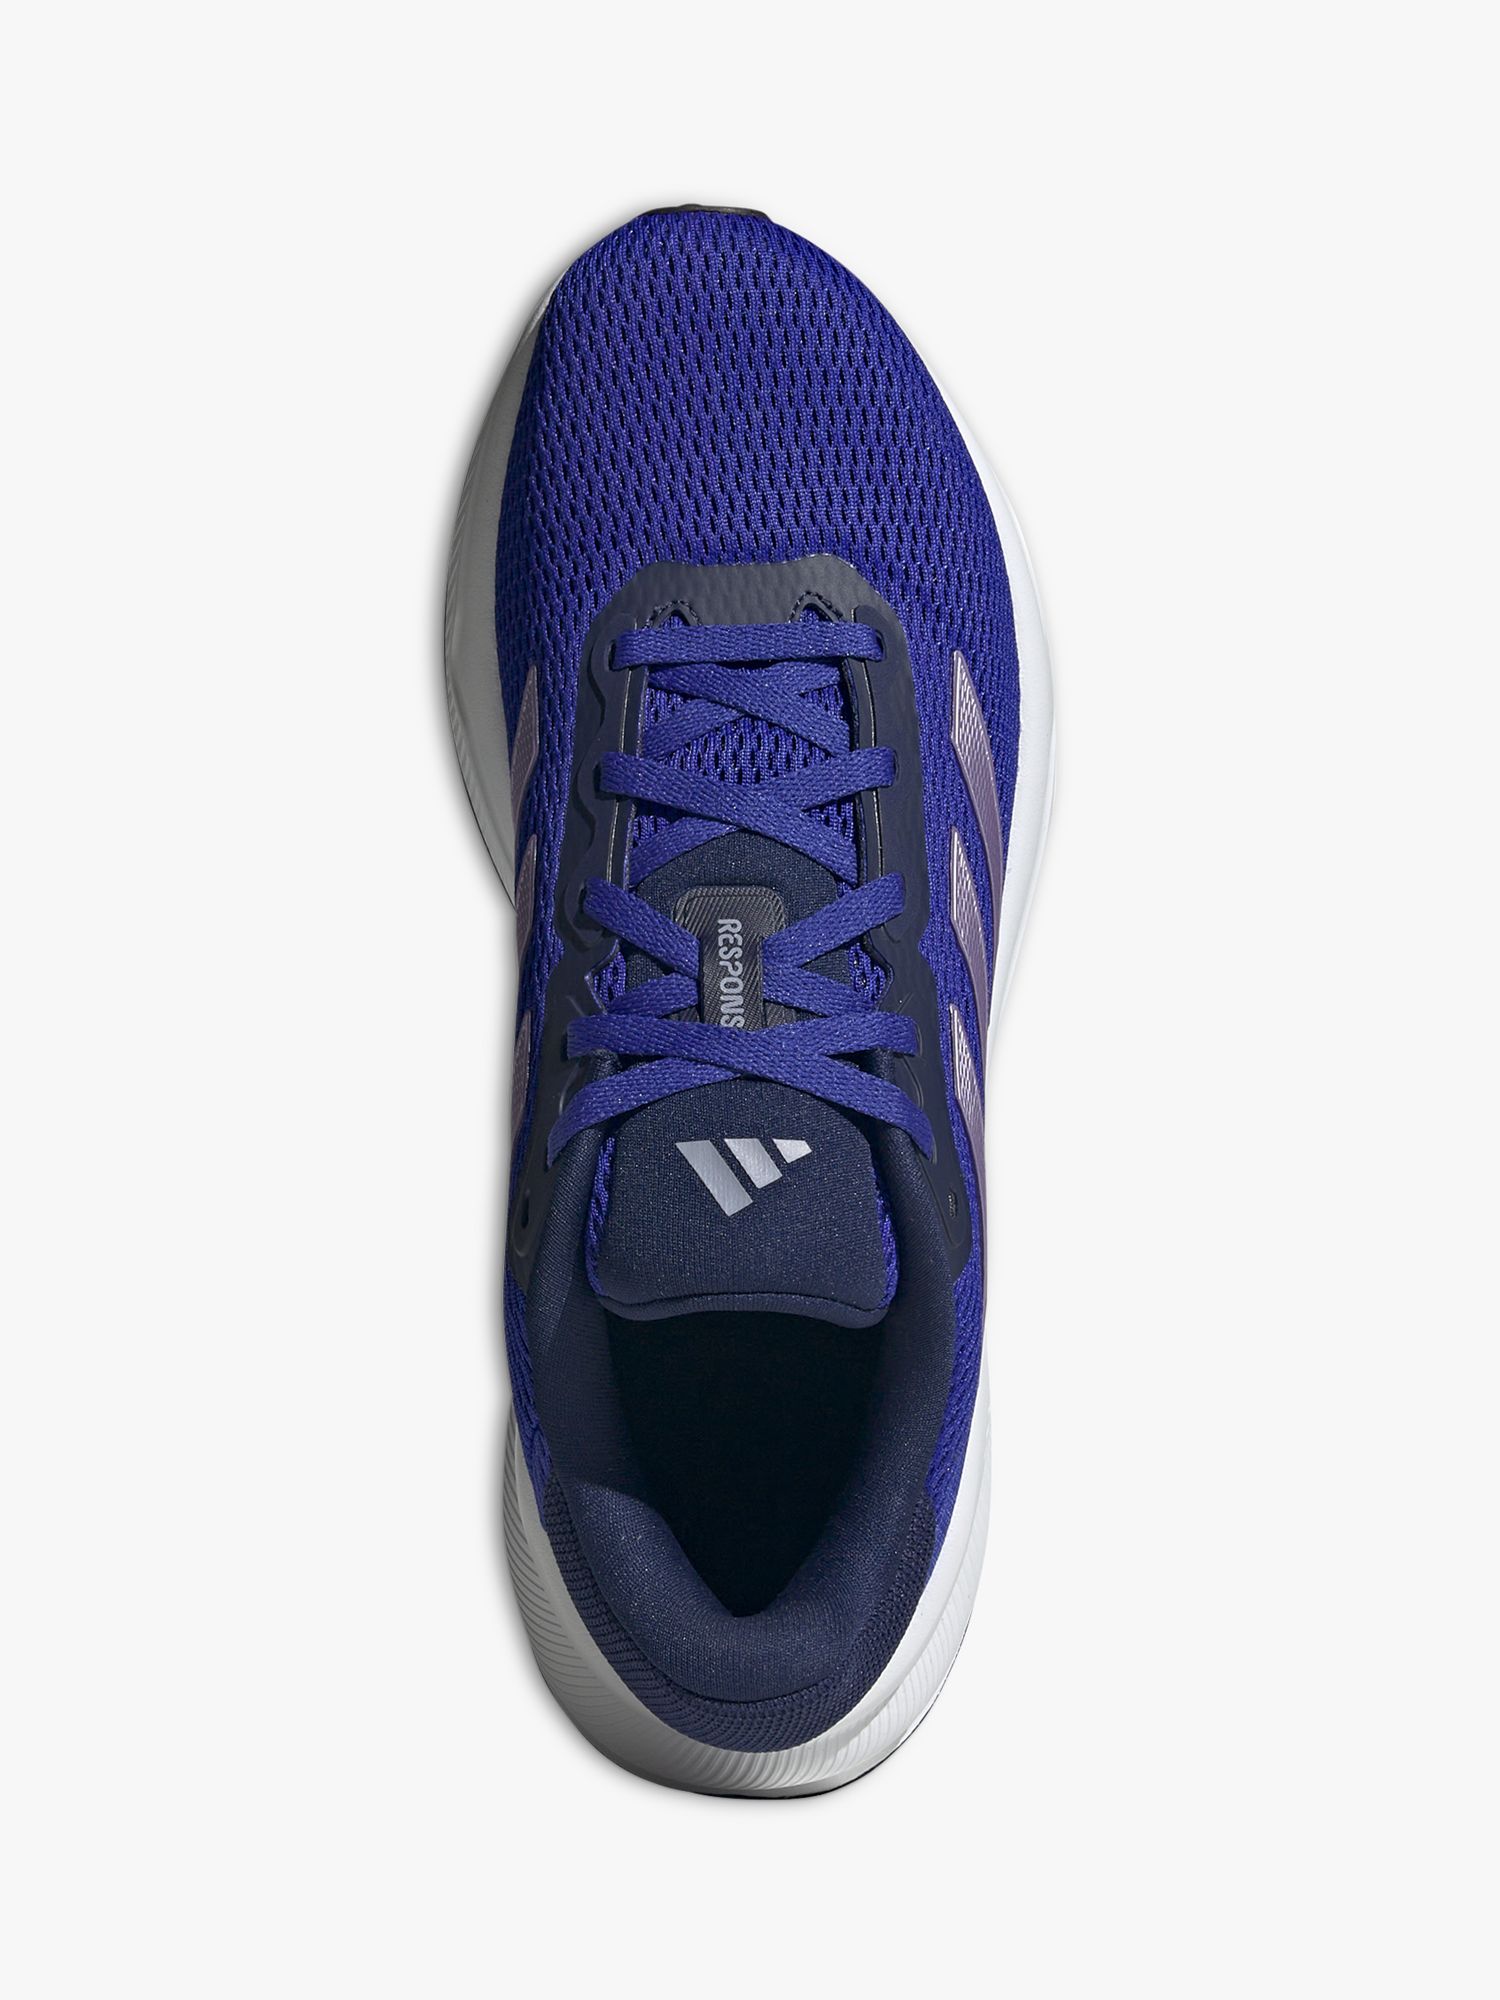 Buy adidas Response W Women's Running Shoes, Blue/Lilac Online at johnlewis.com